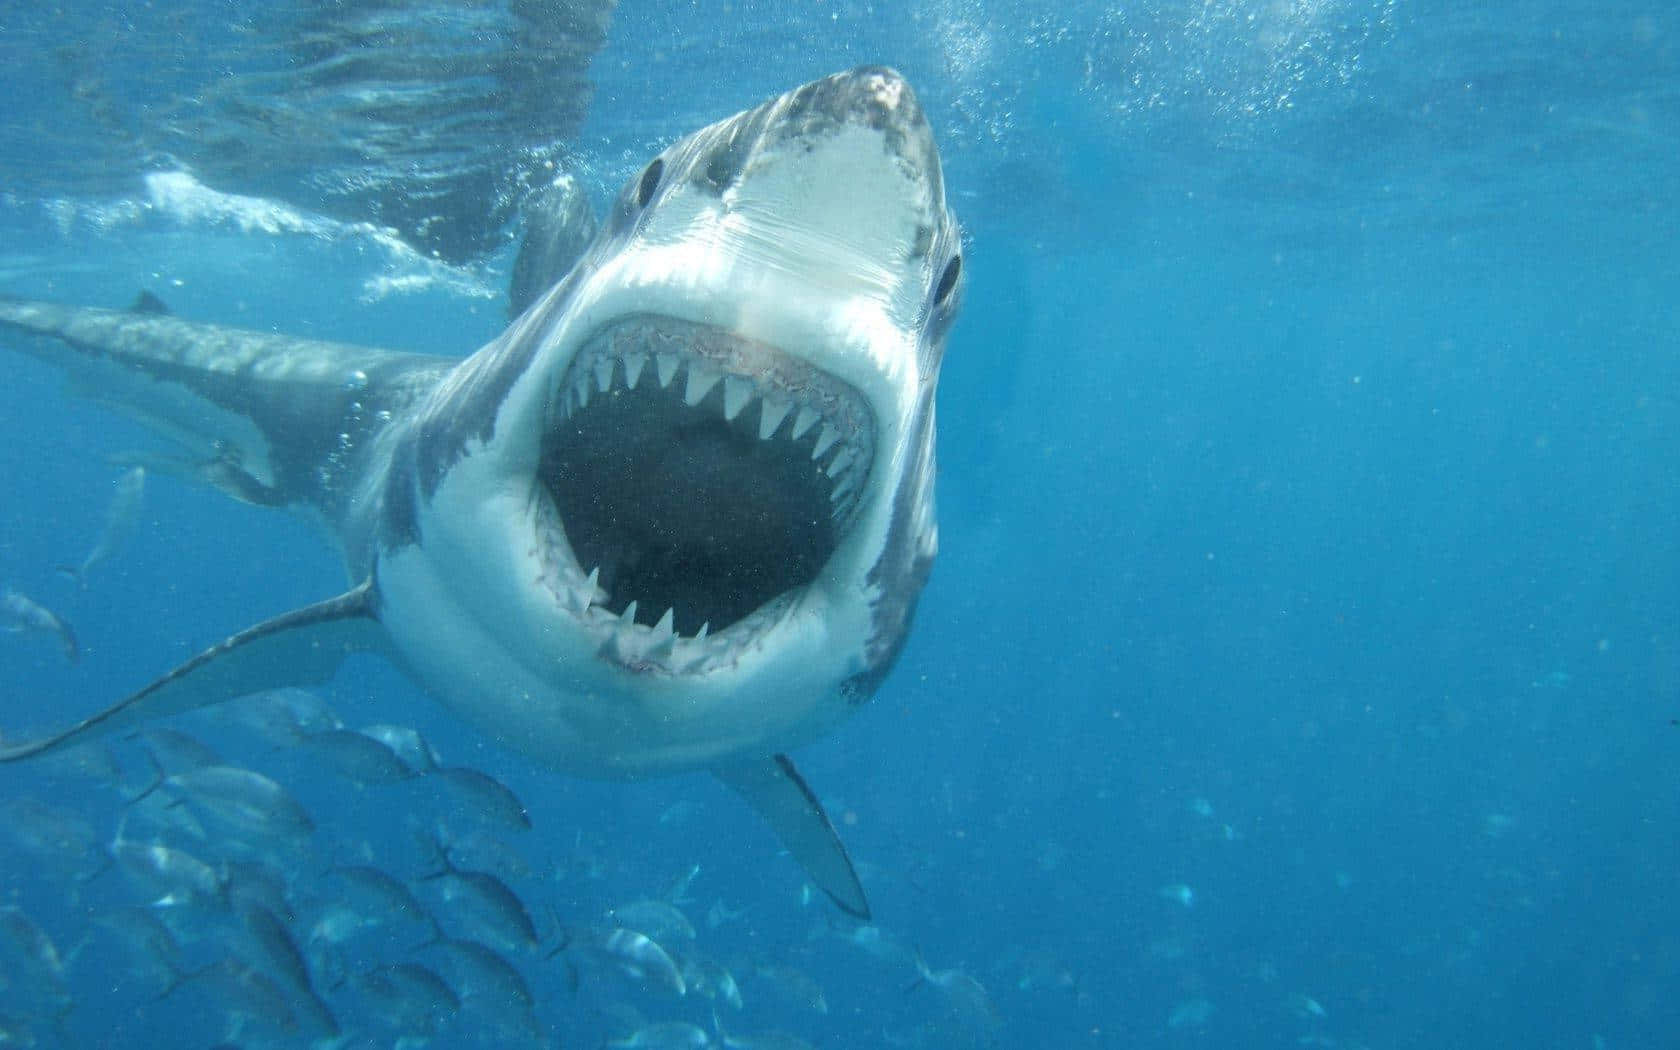 Steer Clear of this Scary Shark Wallpaper